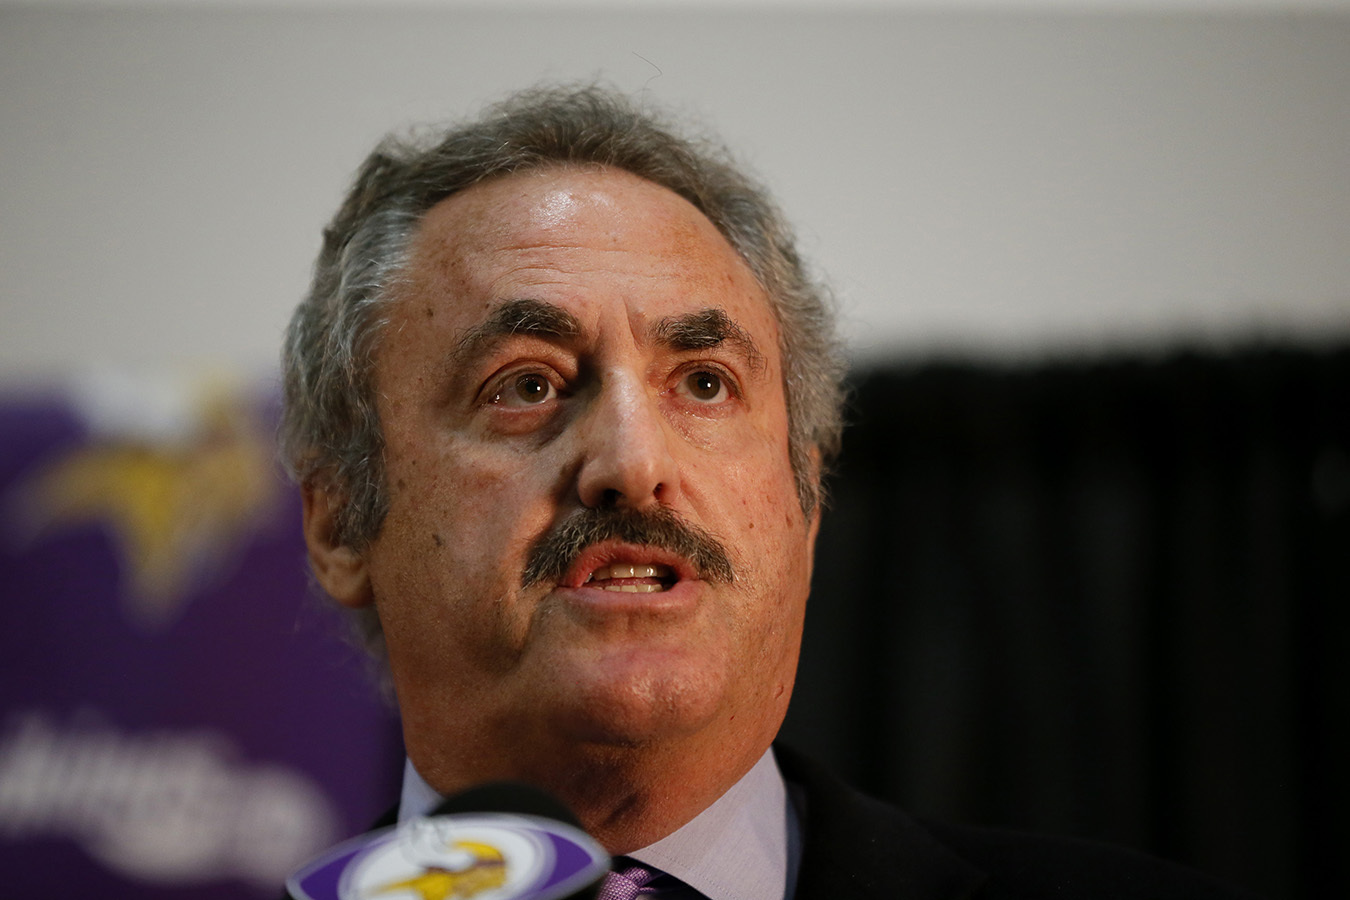 Vikings management and owners repeated variations of that phrase repeatedly during Wednesday's press conference.